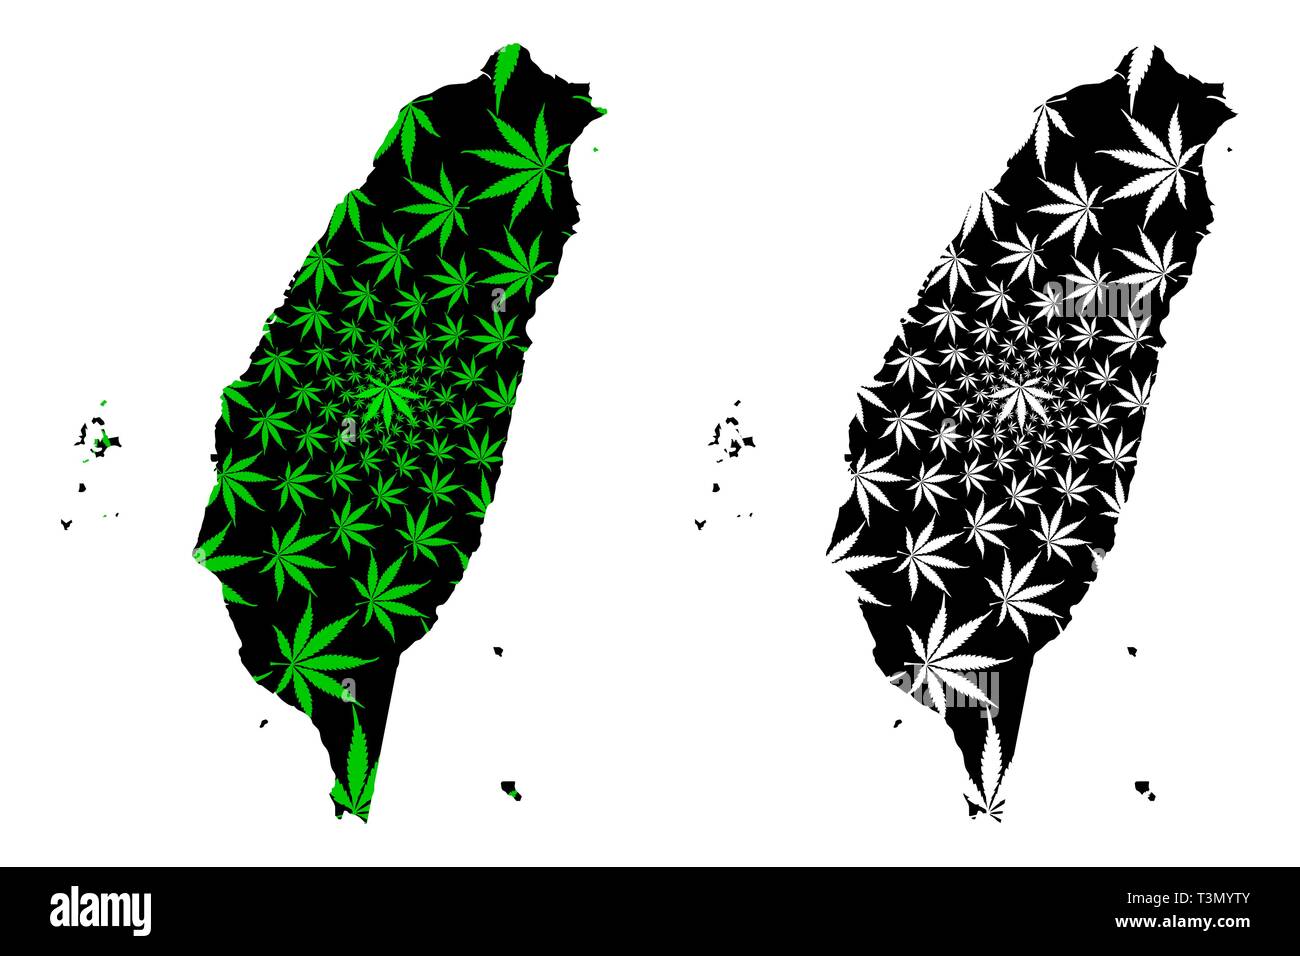 Taiwan - map is designed cannabis leaf green and black, Republic of China (ROC) map made of marijuana (marihuana,THC) foliage, Stock Vector